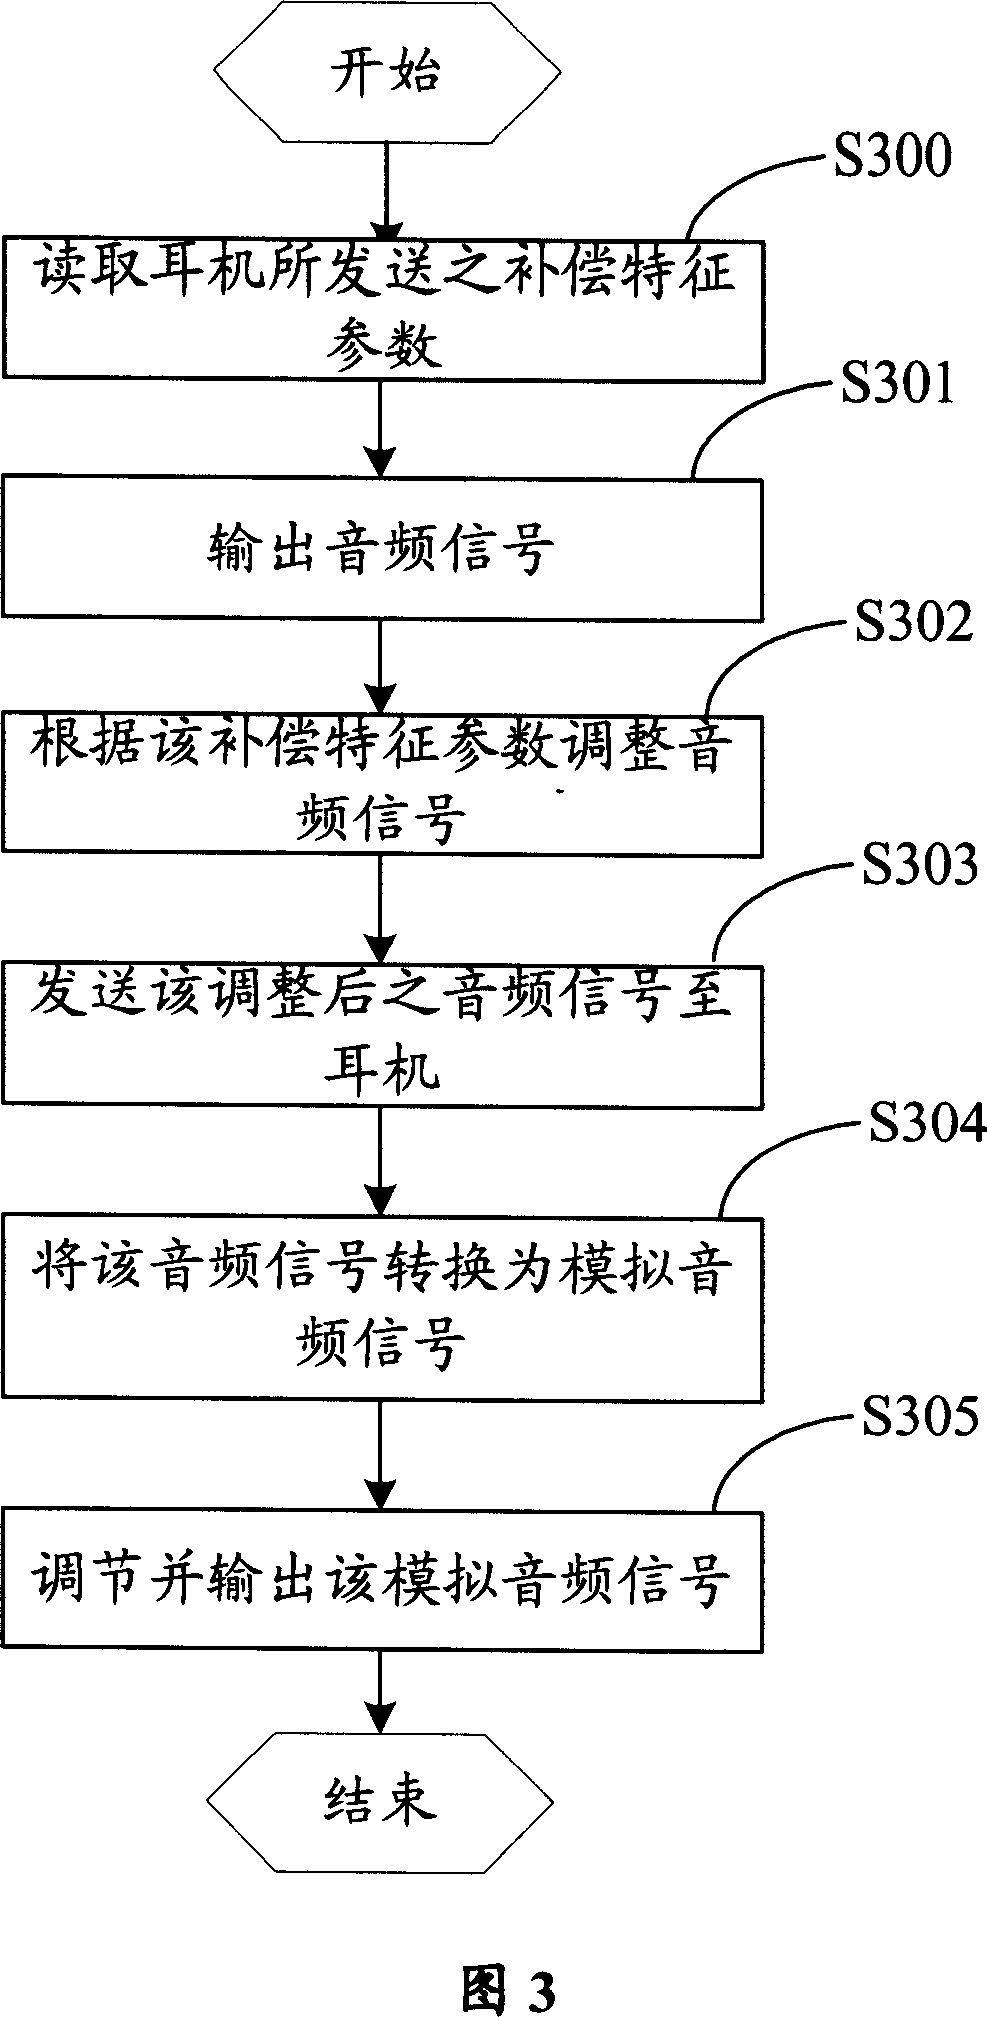 Sound output system and method